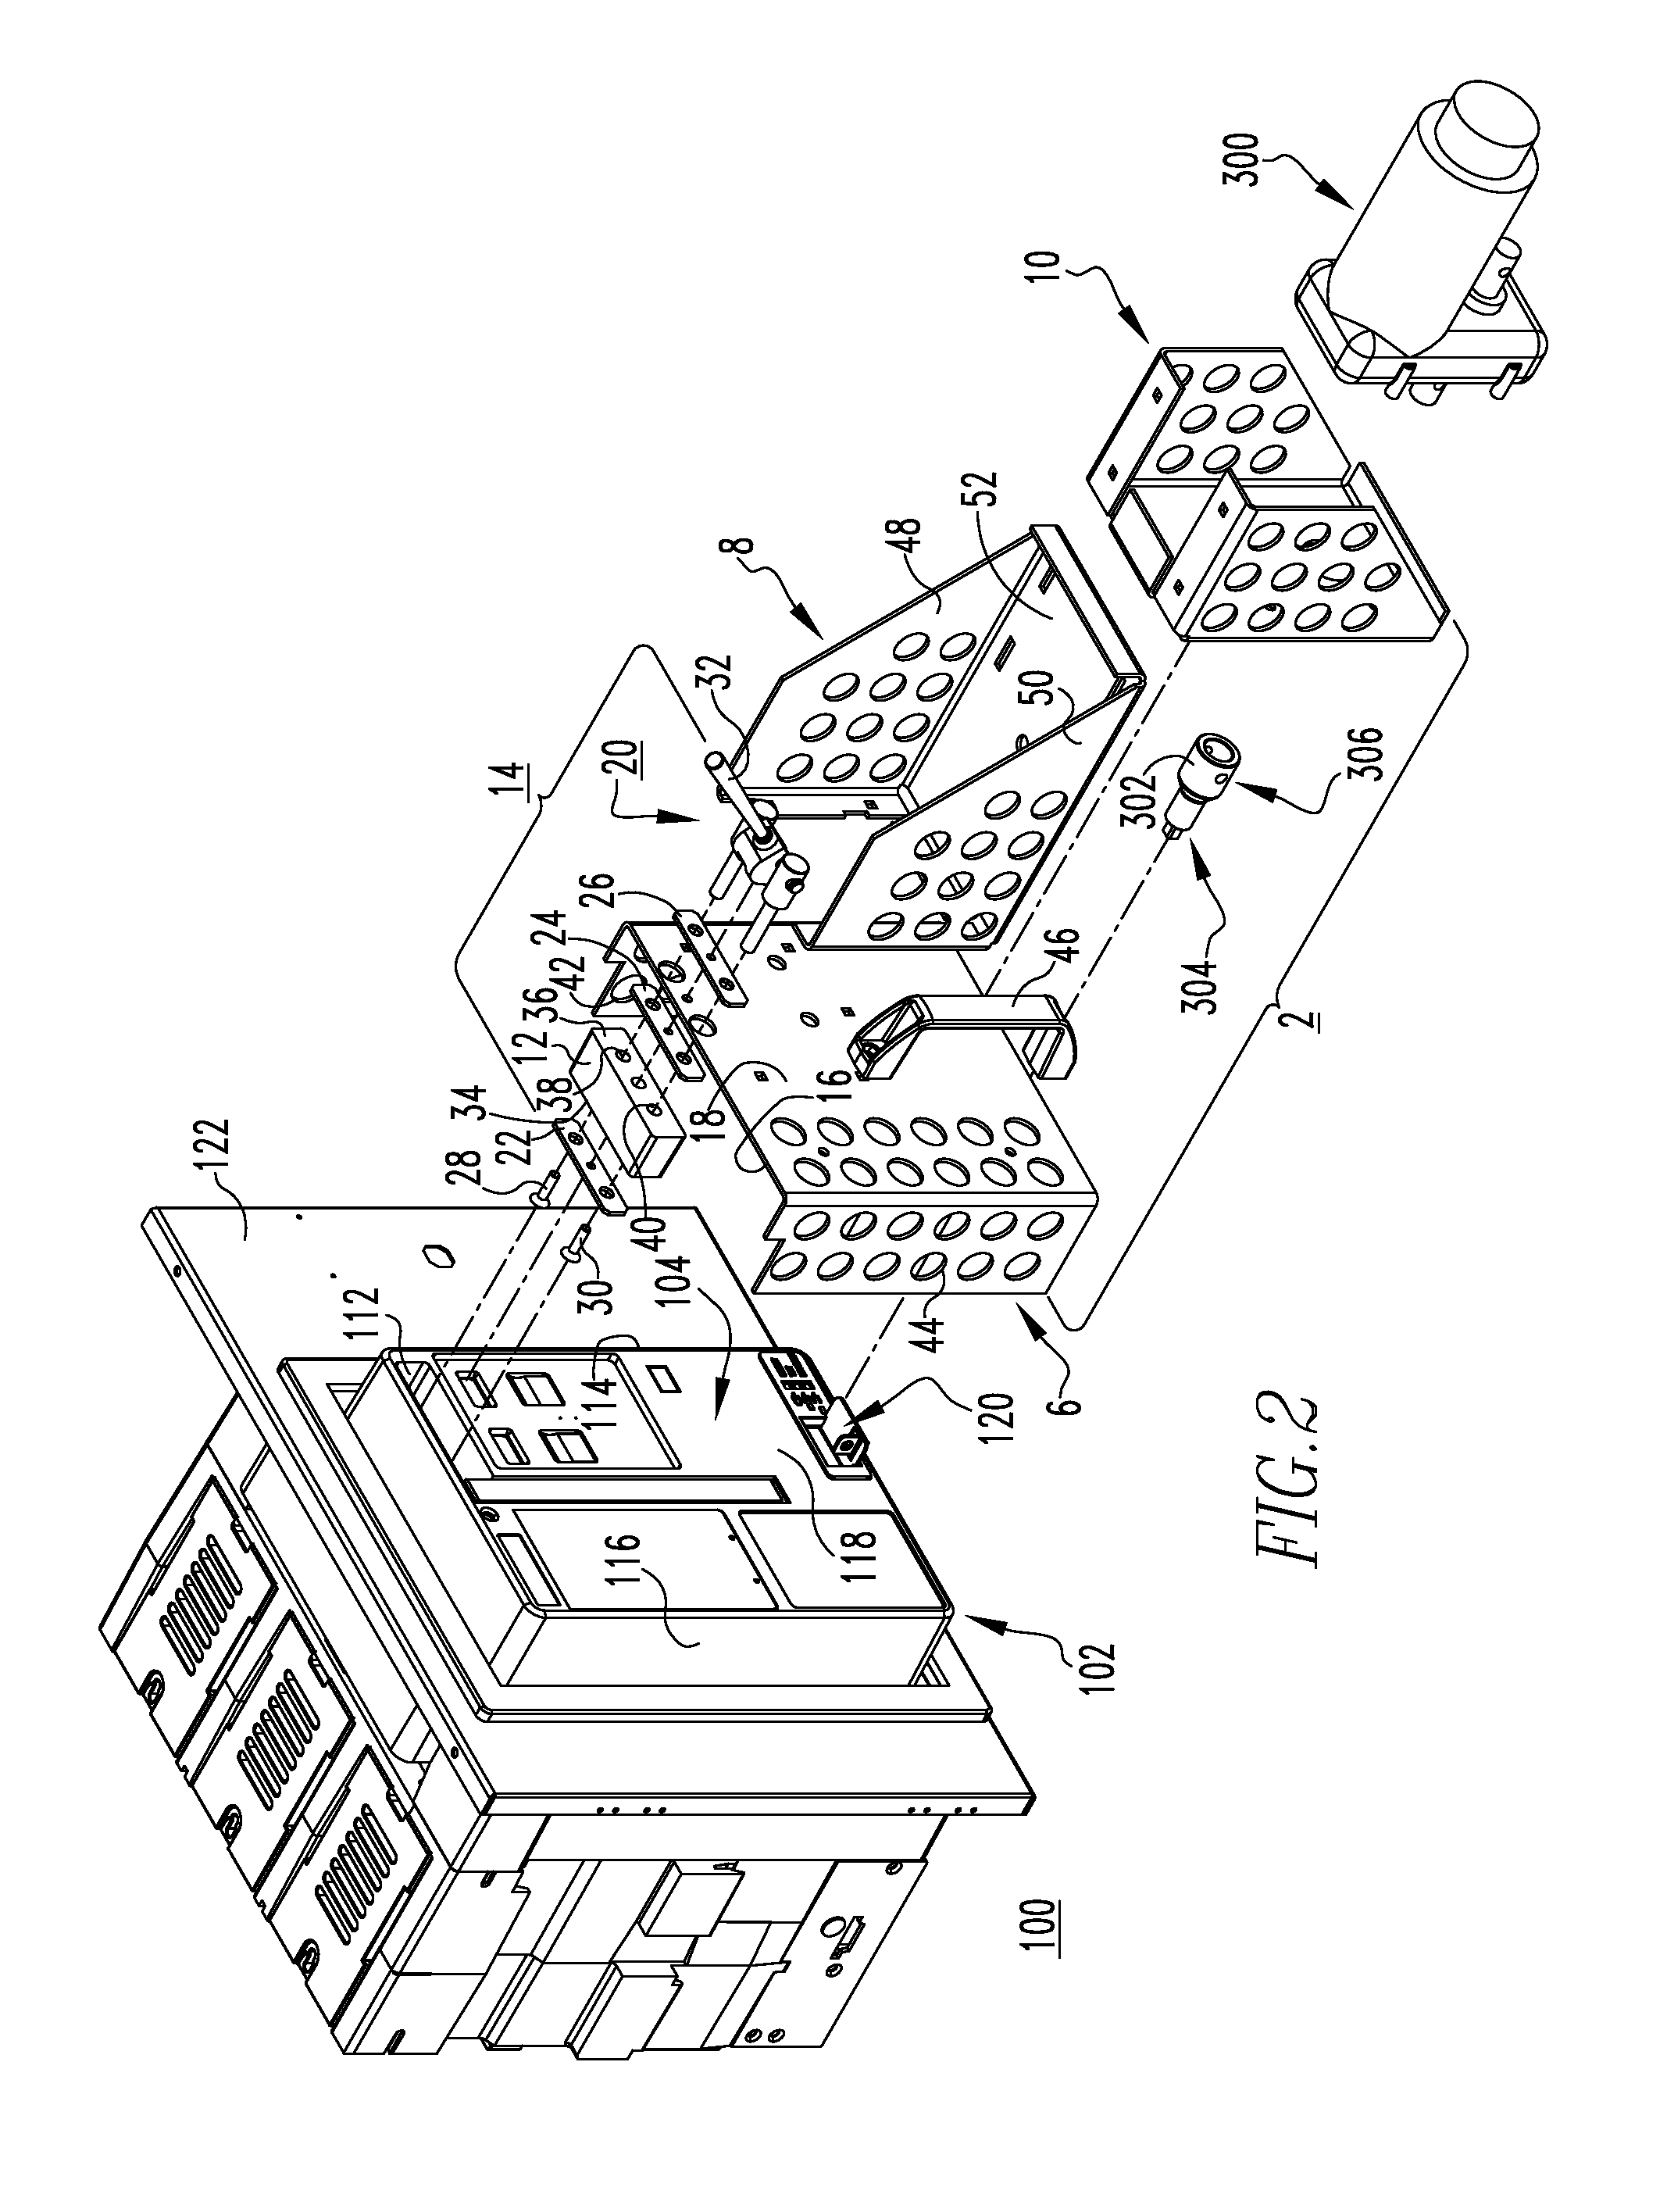 Electrical switching apparatus and mounting assembly therefor